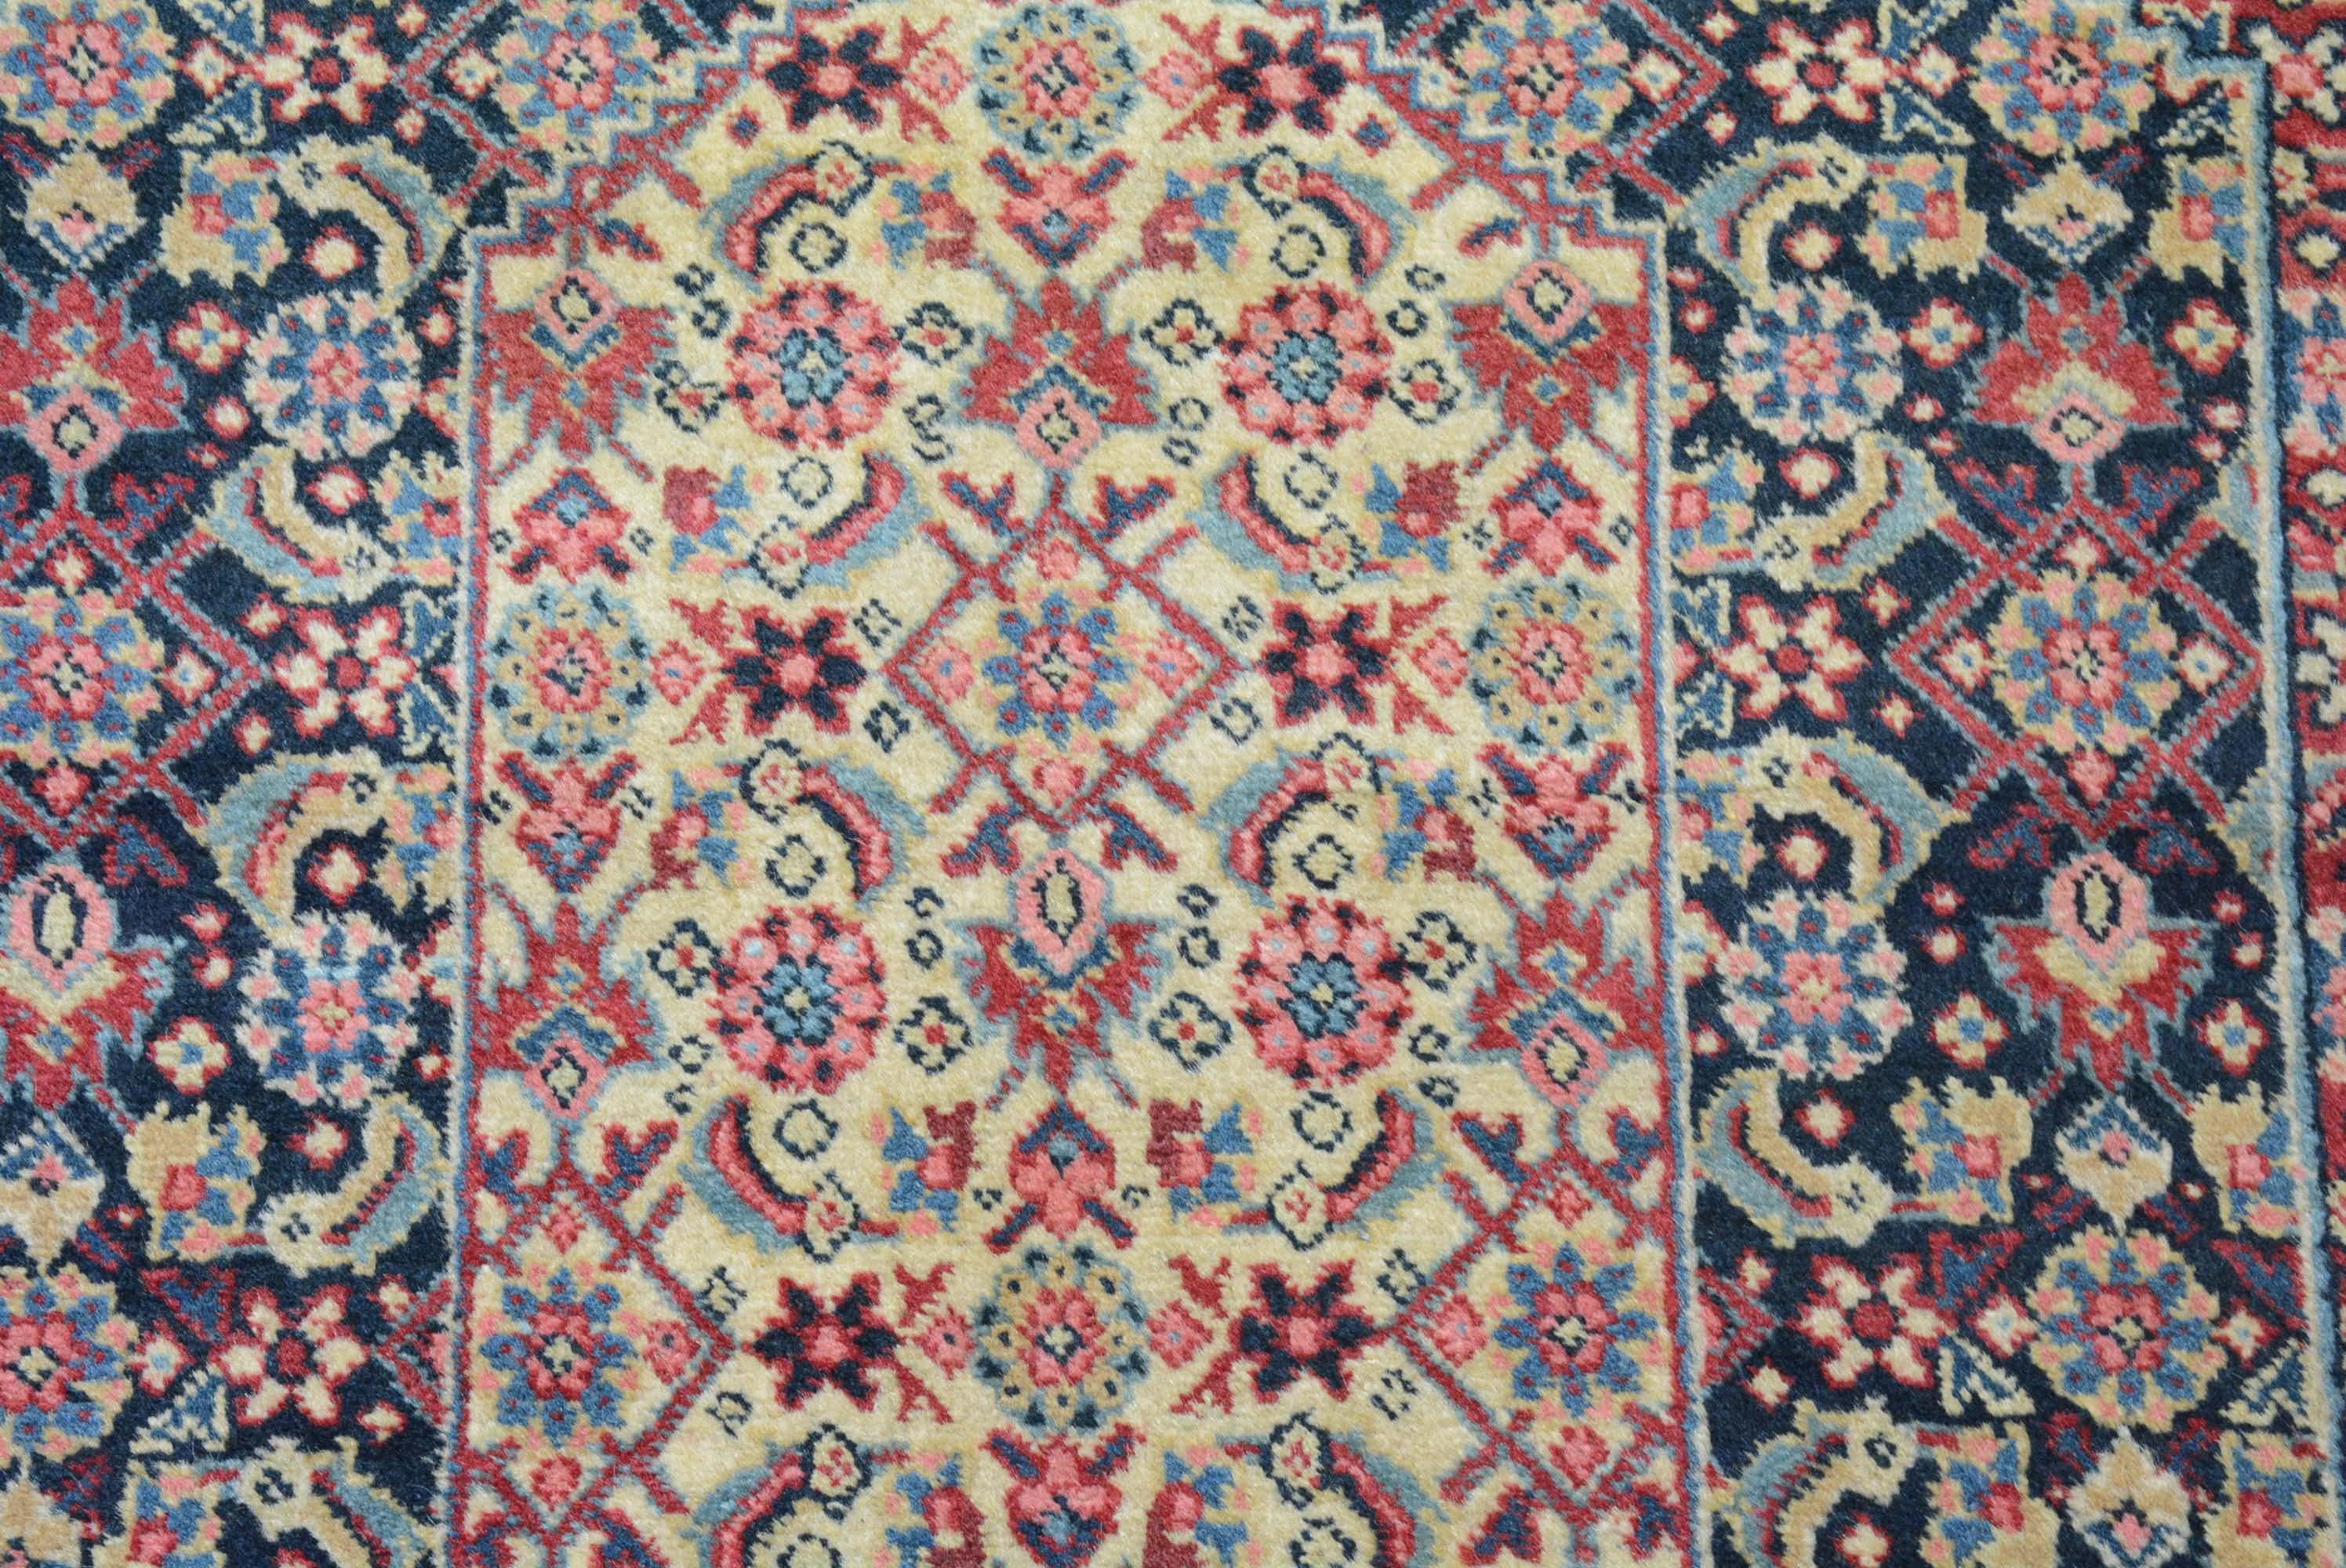 Antique Persian Tabriz Rug  In Excellent Condition For Sale In Closter, NJ